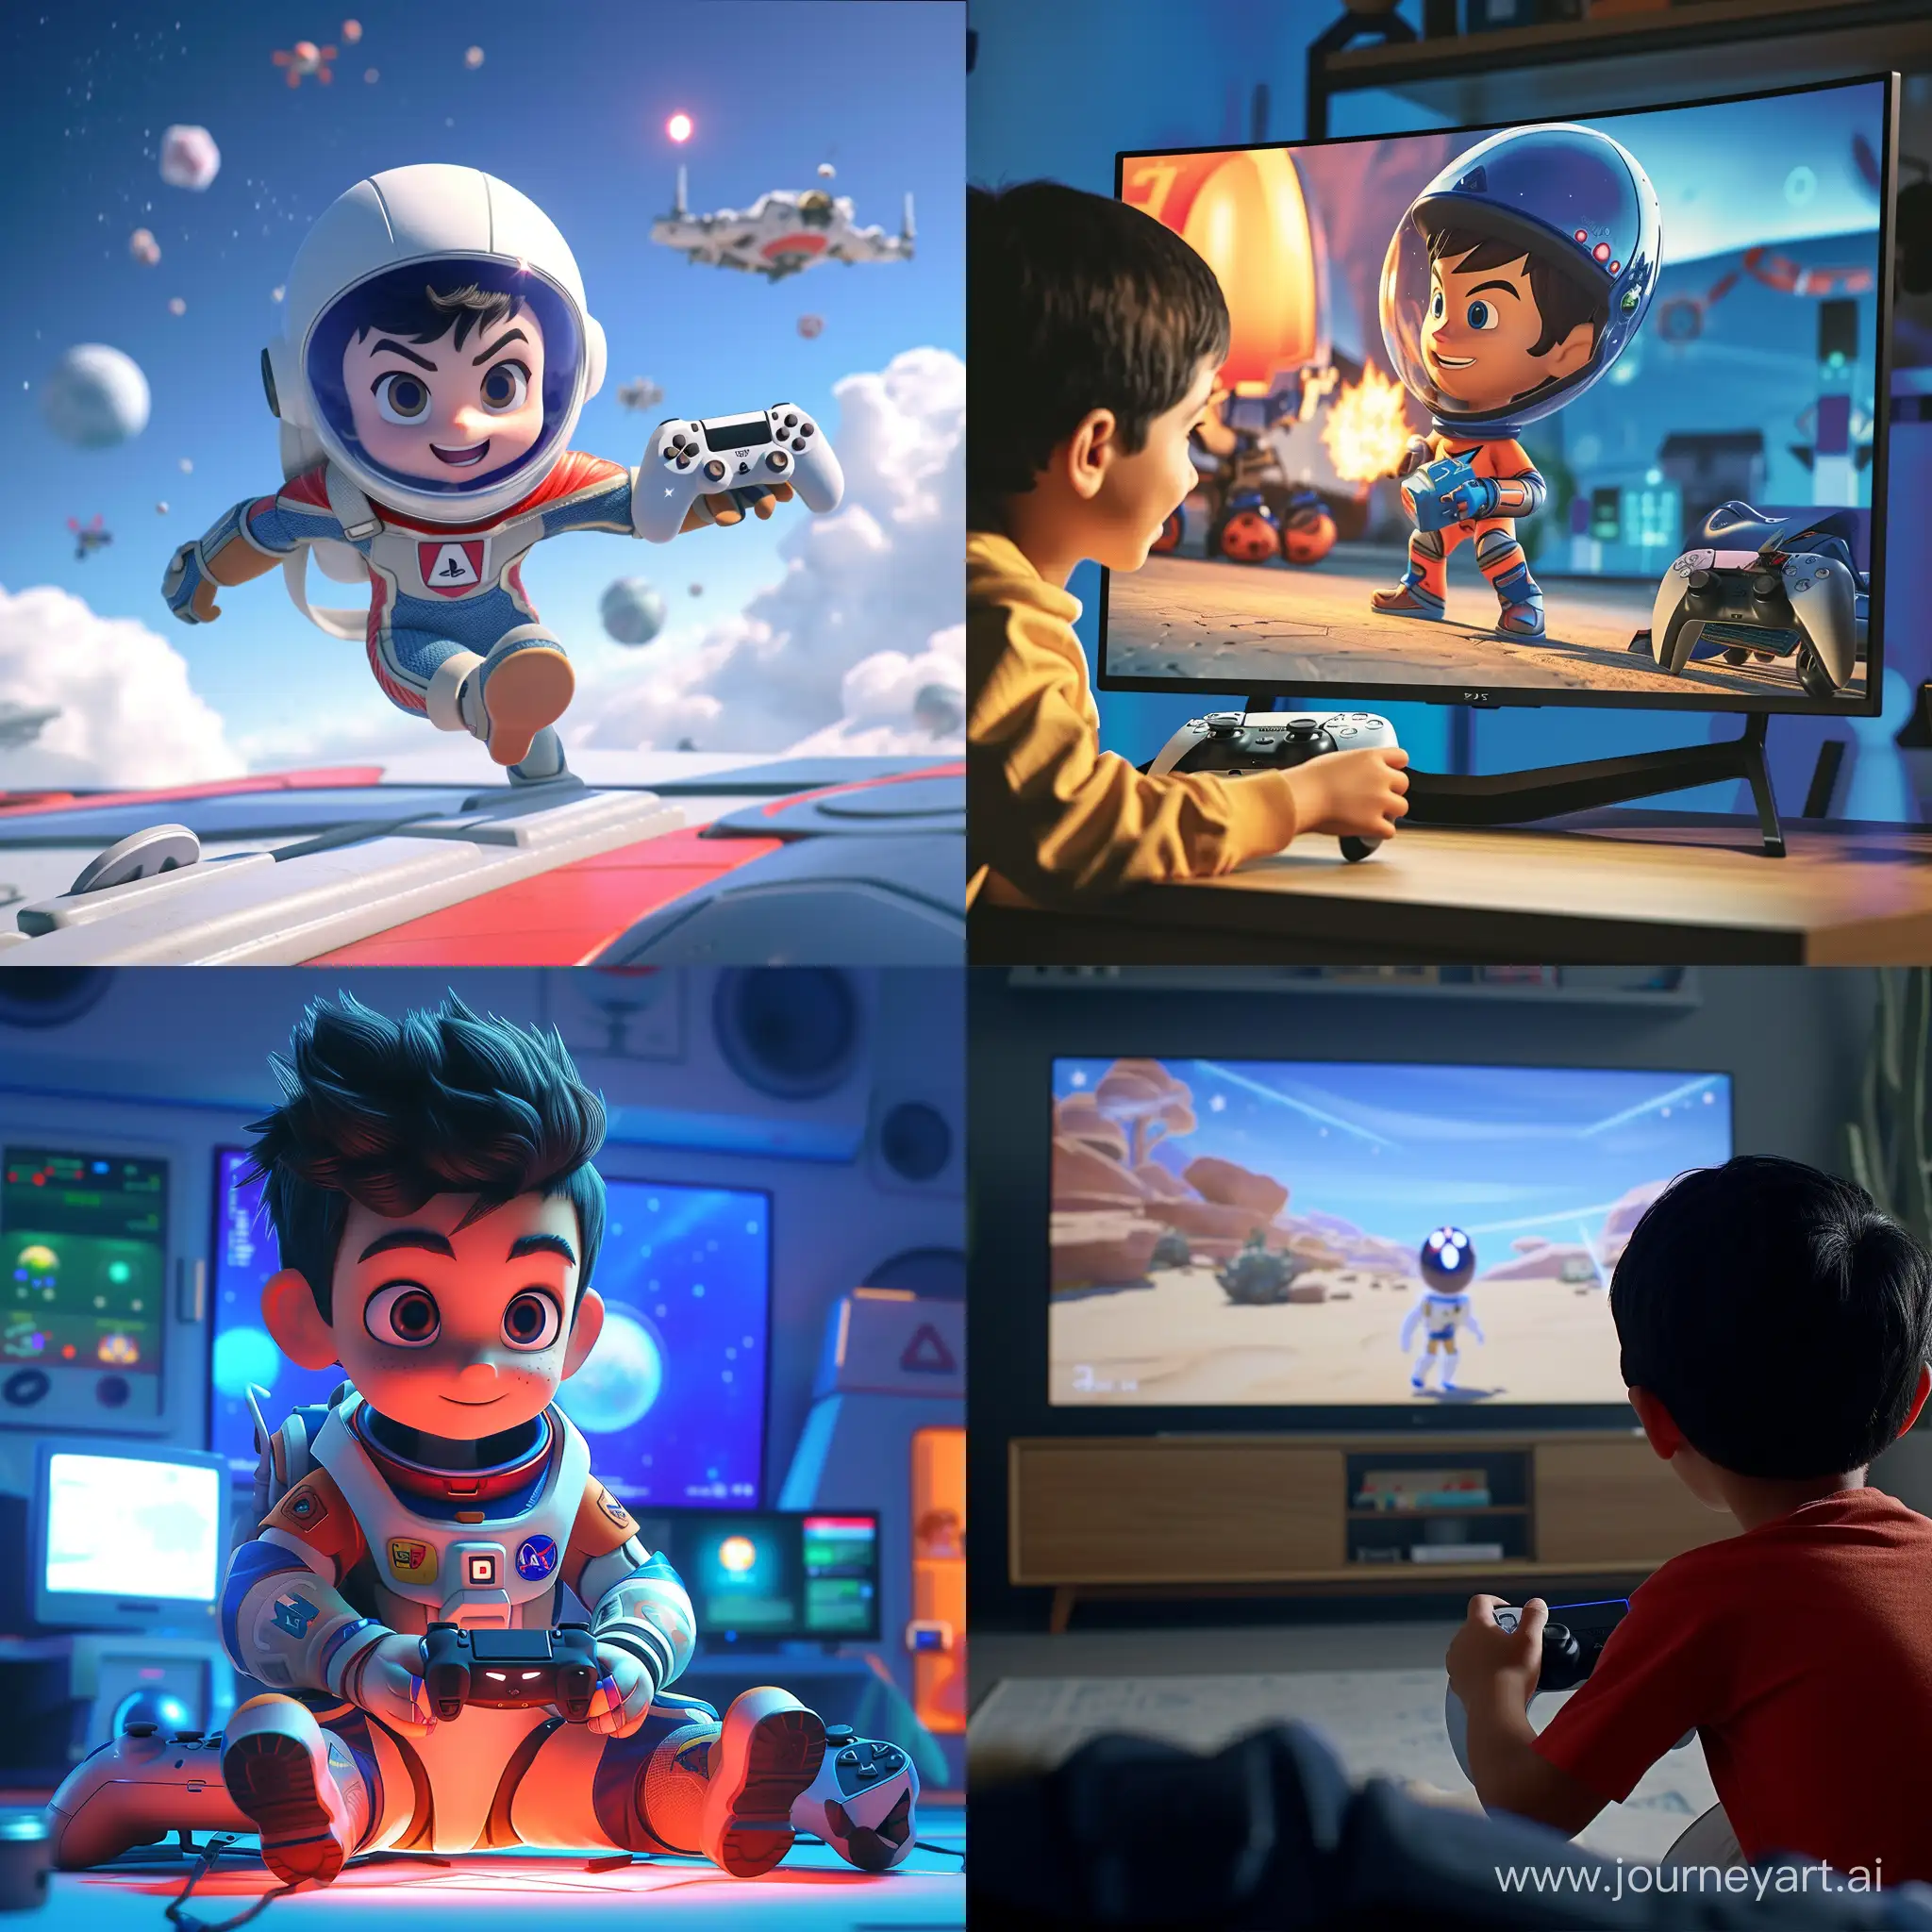 Astro boy playing in playstation 5